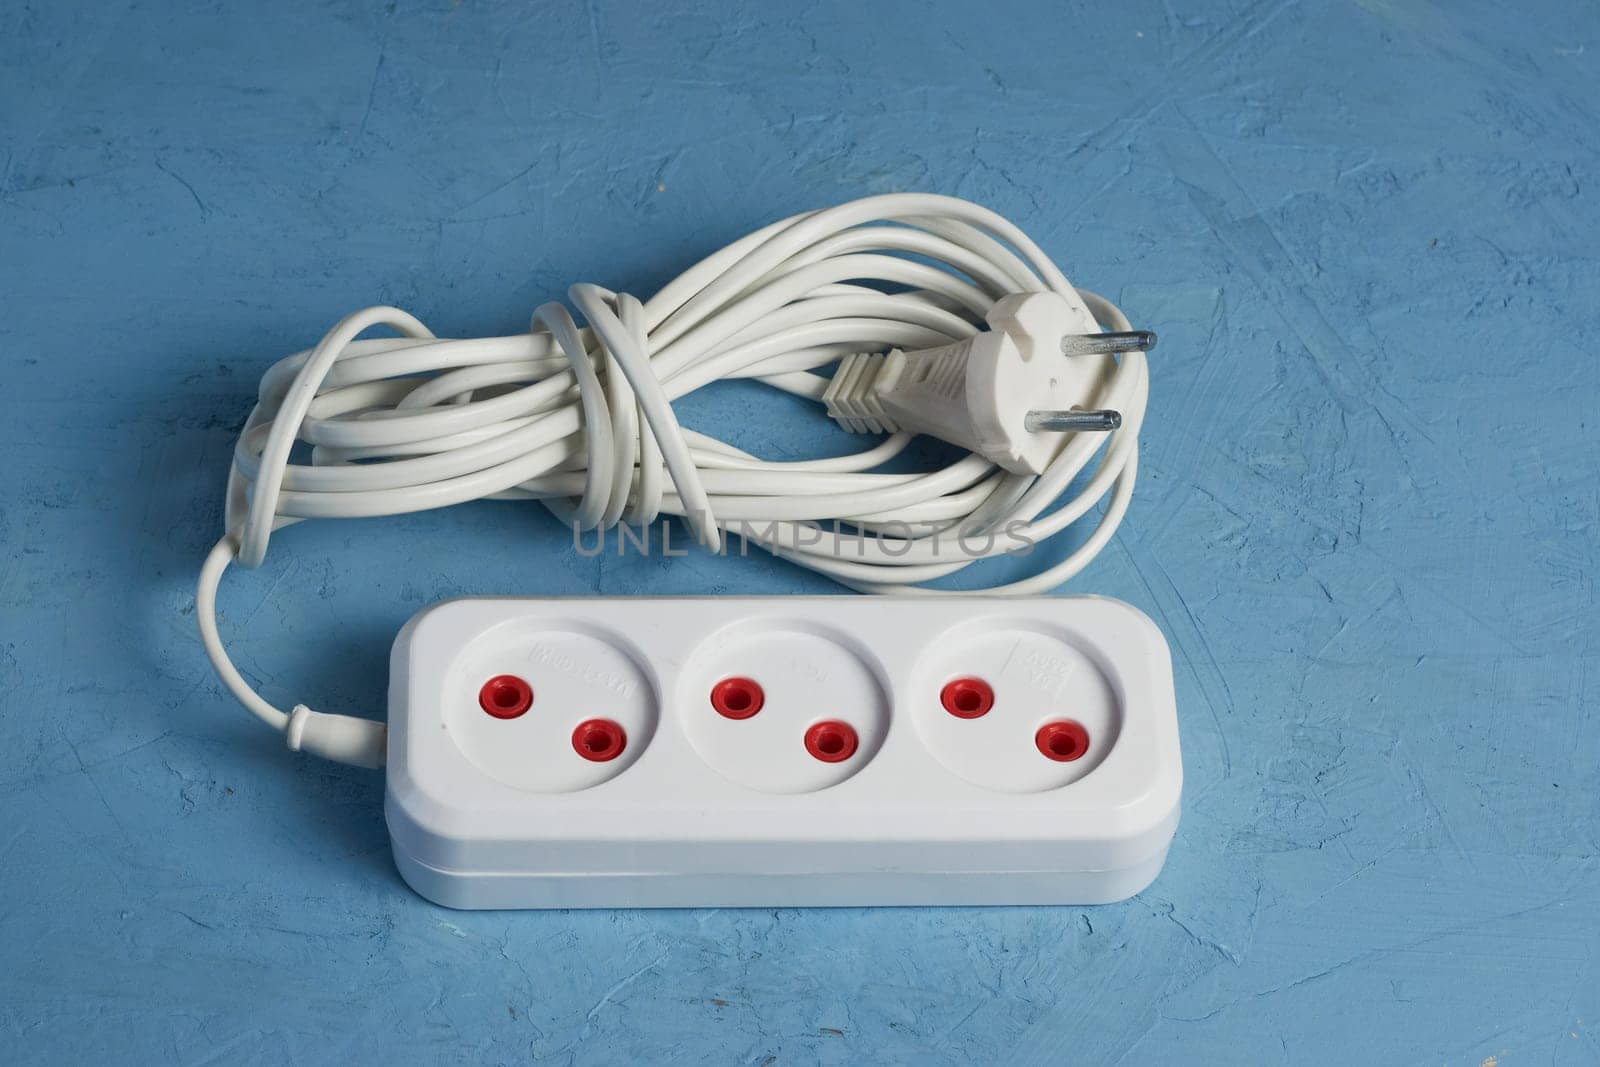 Power strip with three connectors and on a blue background. Energy consumption concept